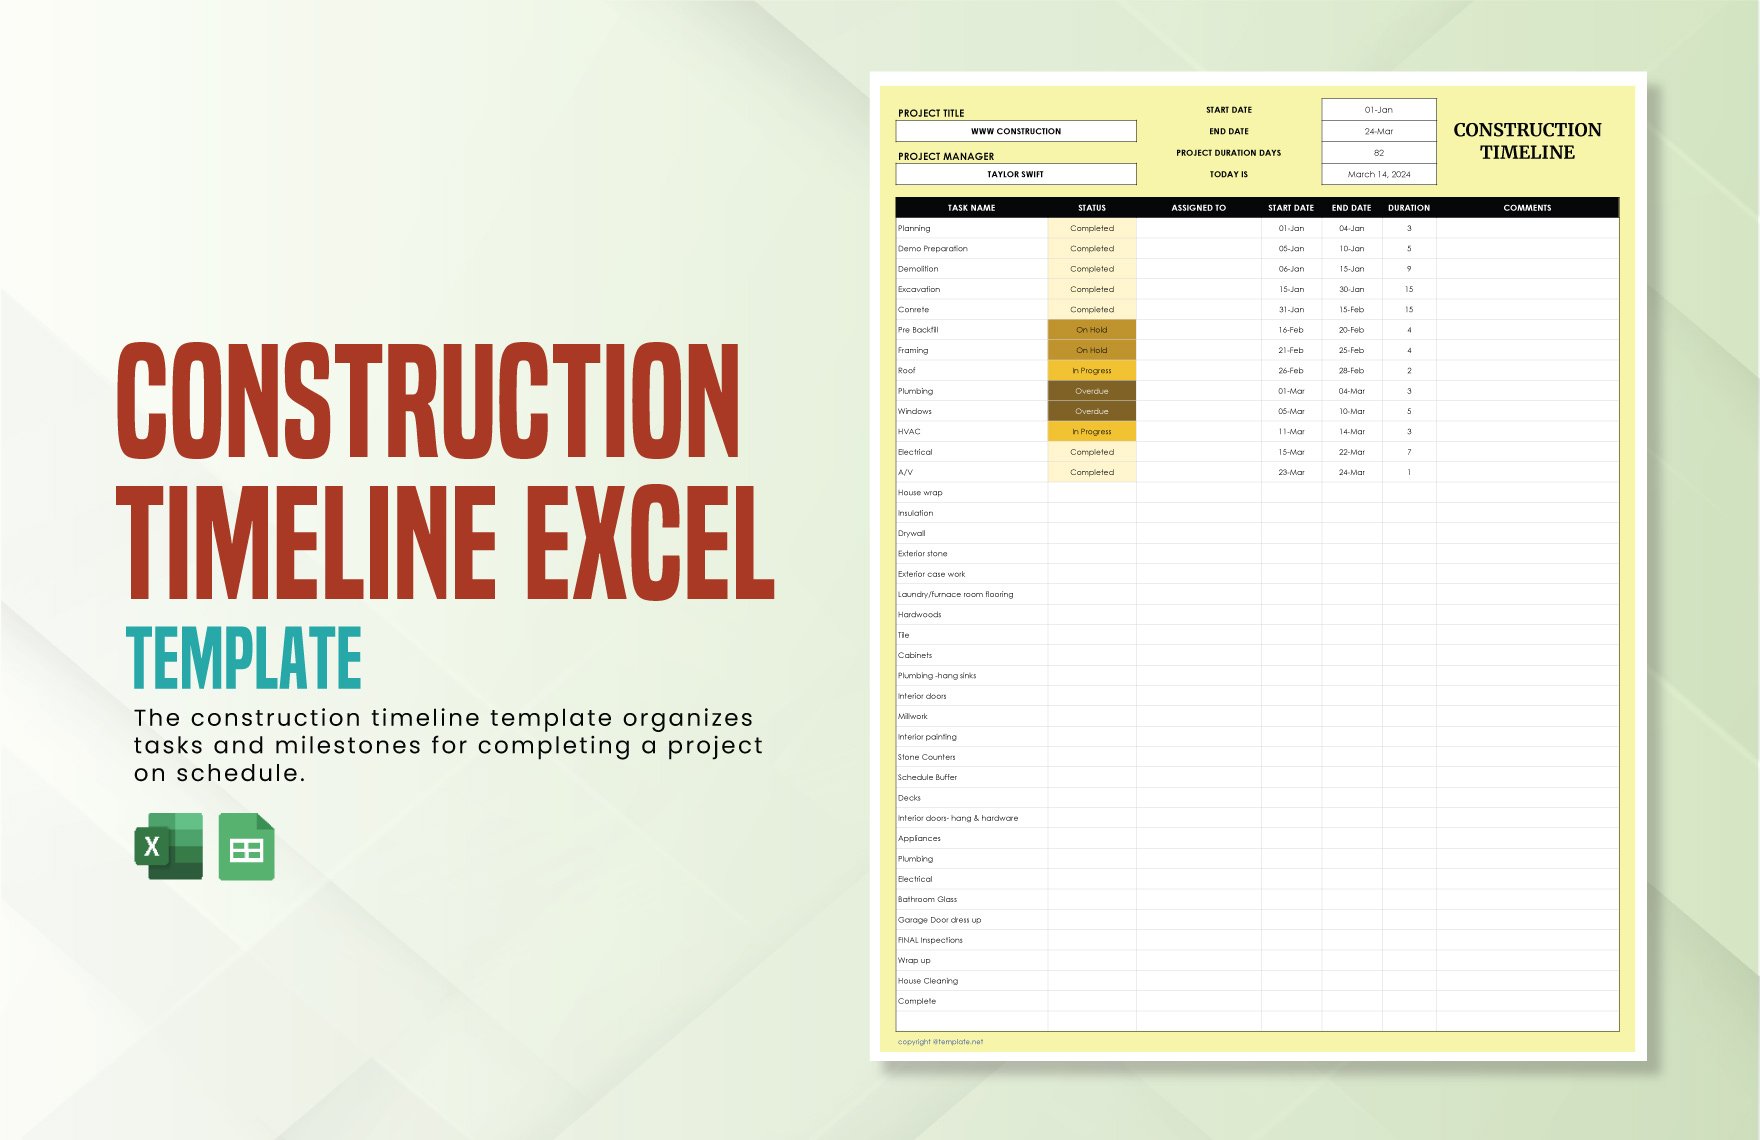 Construction Timeline Excel Template in Excel, Google Sheets